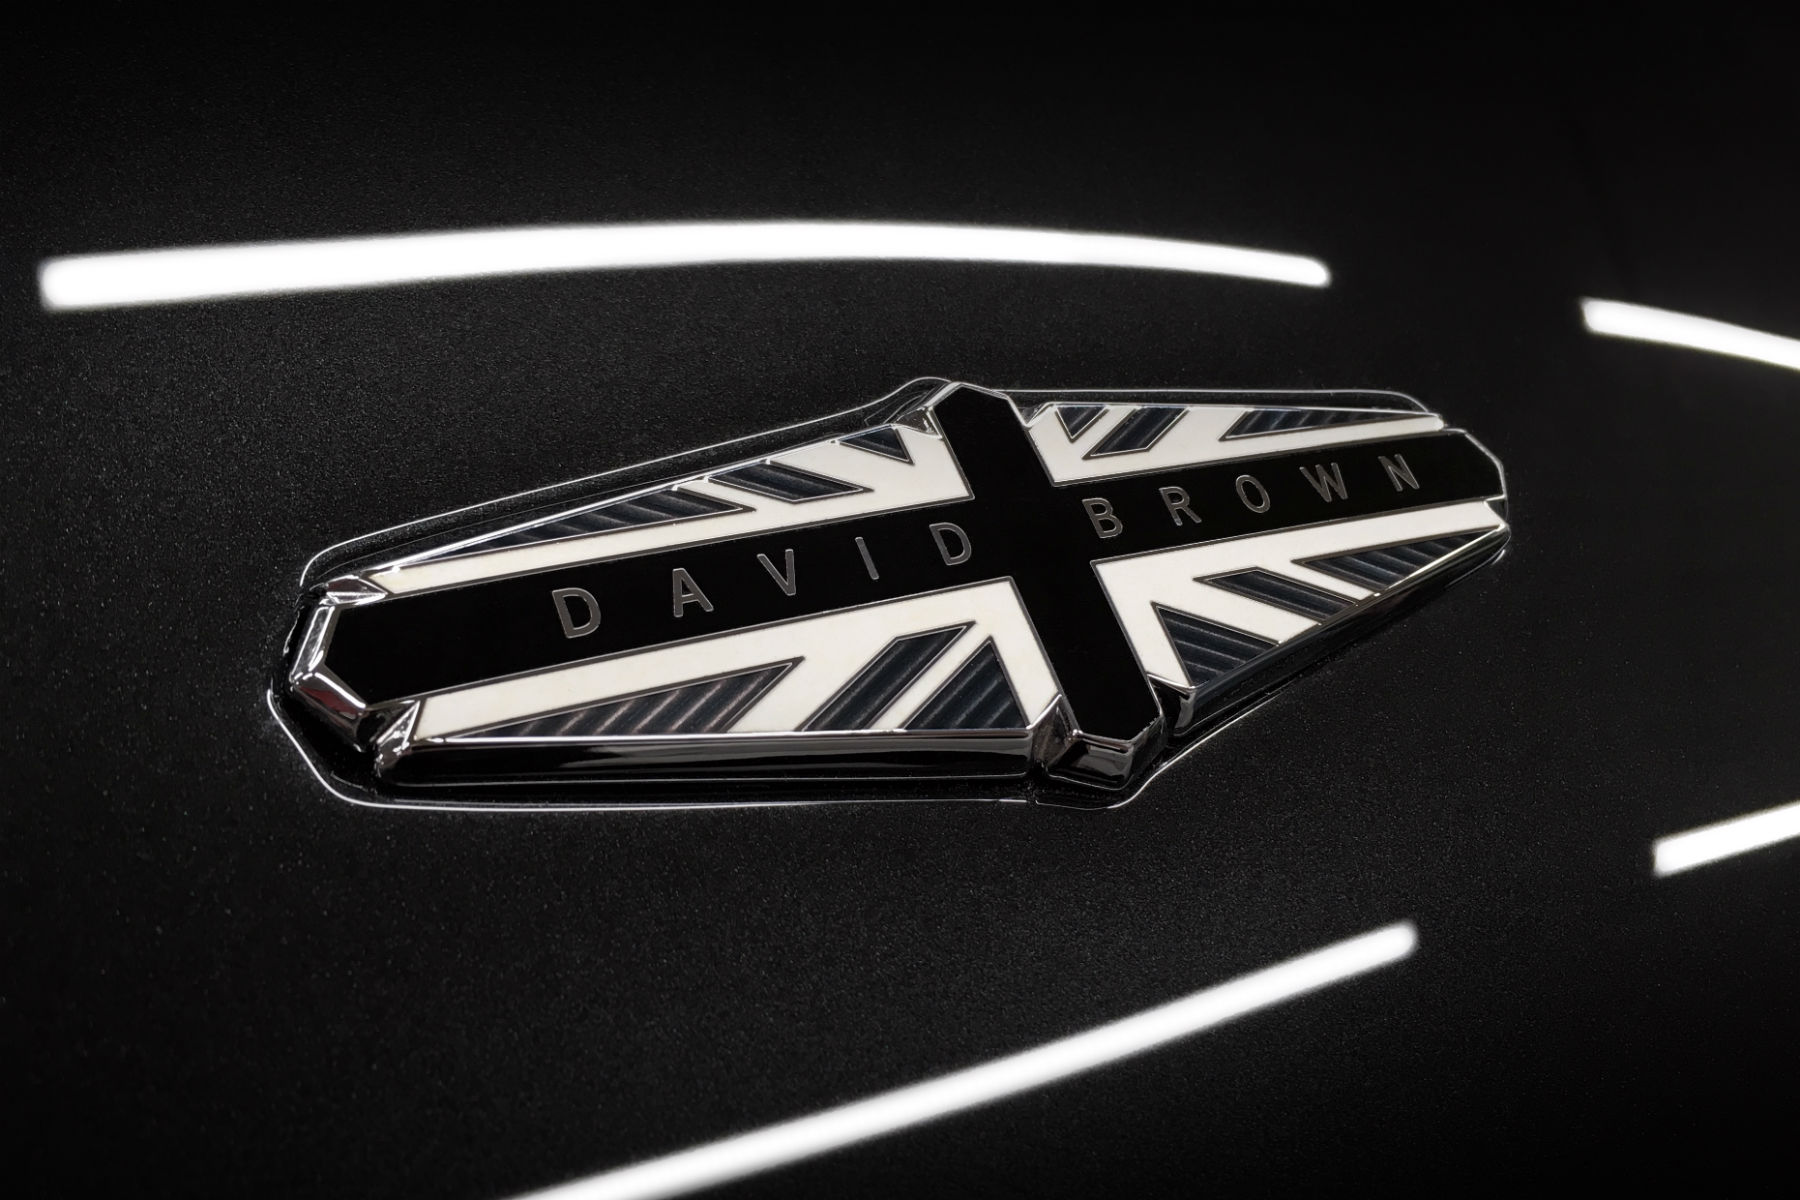 David Brown Automotive set to reveal another retro remake